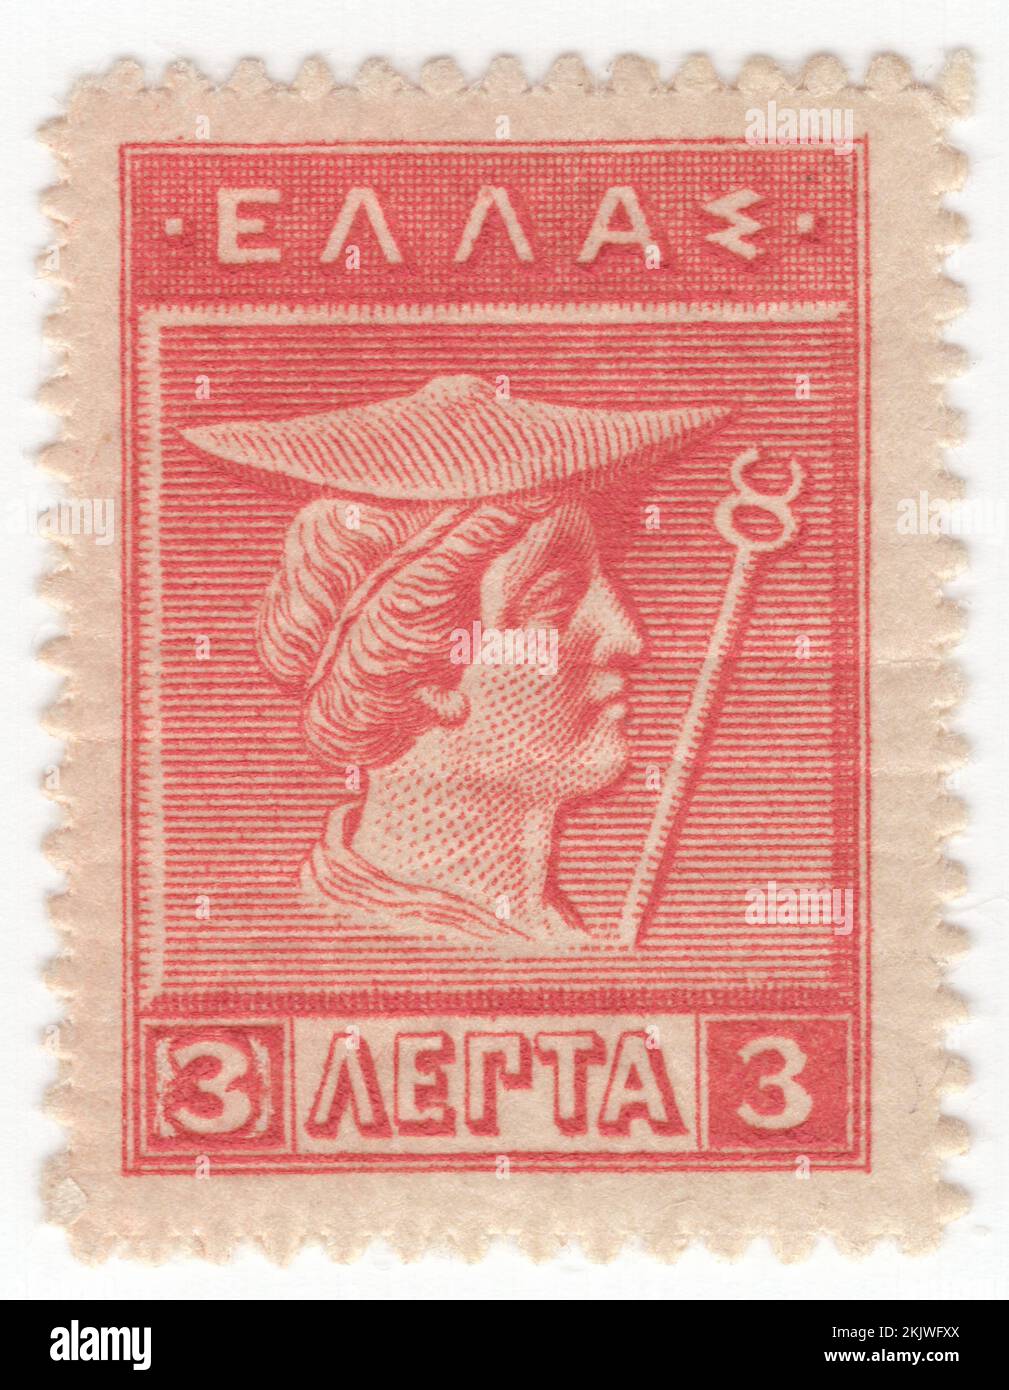 GREECE - 1911: An 3 lepta vermilion postage stamp depicting Hermes, from Old Cretan. Designs are from Cretan and Arcadian coins of the 4th Century, B.C., Olympian deity in ancient Greek religion and mythology. Member of the Twelve Olympians. Hermes is considered the herald of the gods. He is also considered the protector of human heralds, travellers, thieves, merchants, and orators. He is able to move quickly and freely between the worlds of the mortal and the divine, aided by his winged sandals. Hermes plays the role of the psychopomp or 'soul guide'—a conductor of souls into the afterlife Stock Photo